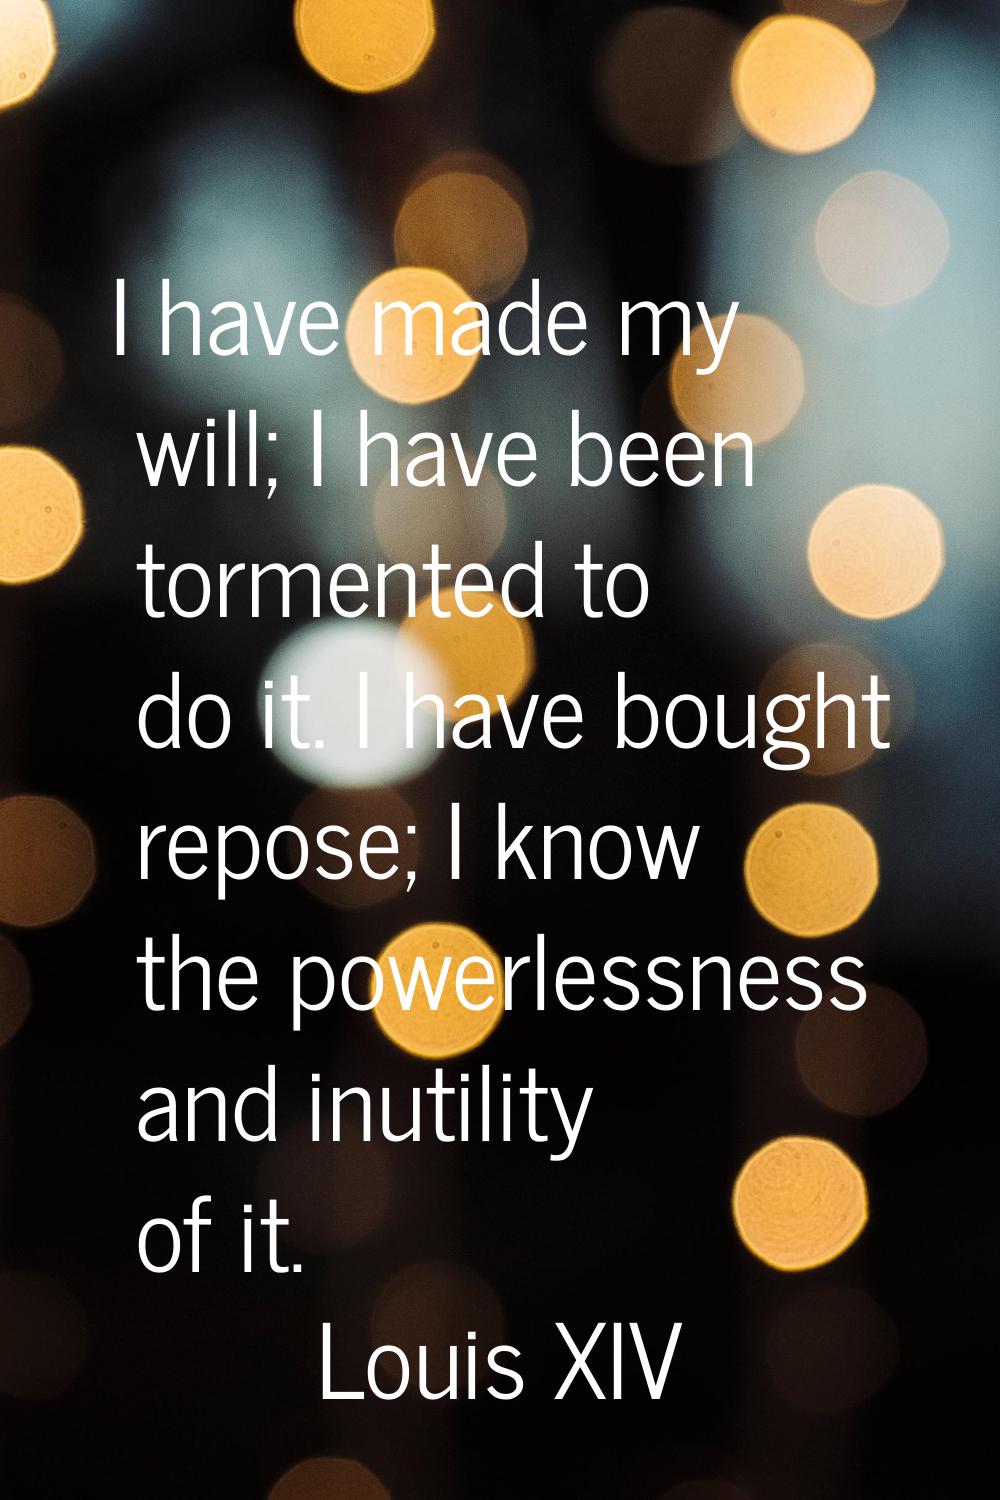 I have made my will; I have been tormented to do it. I have bought repose; I know the powerlessness